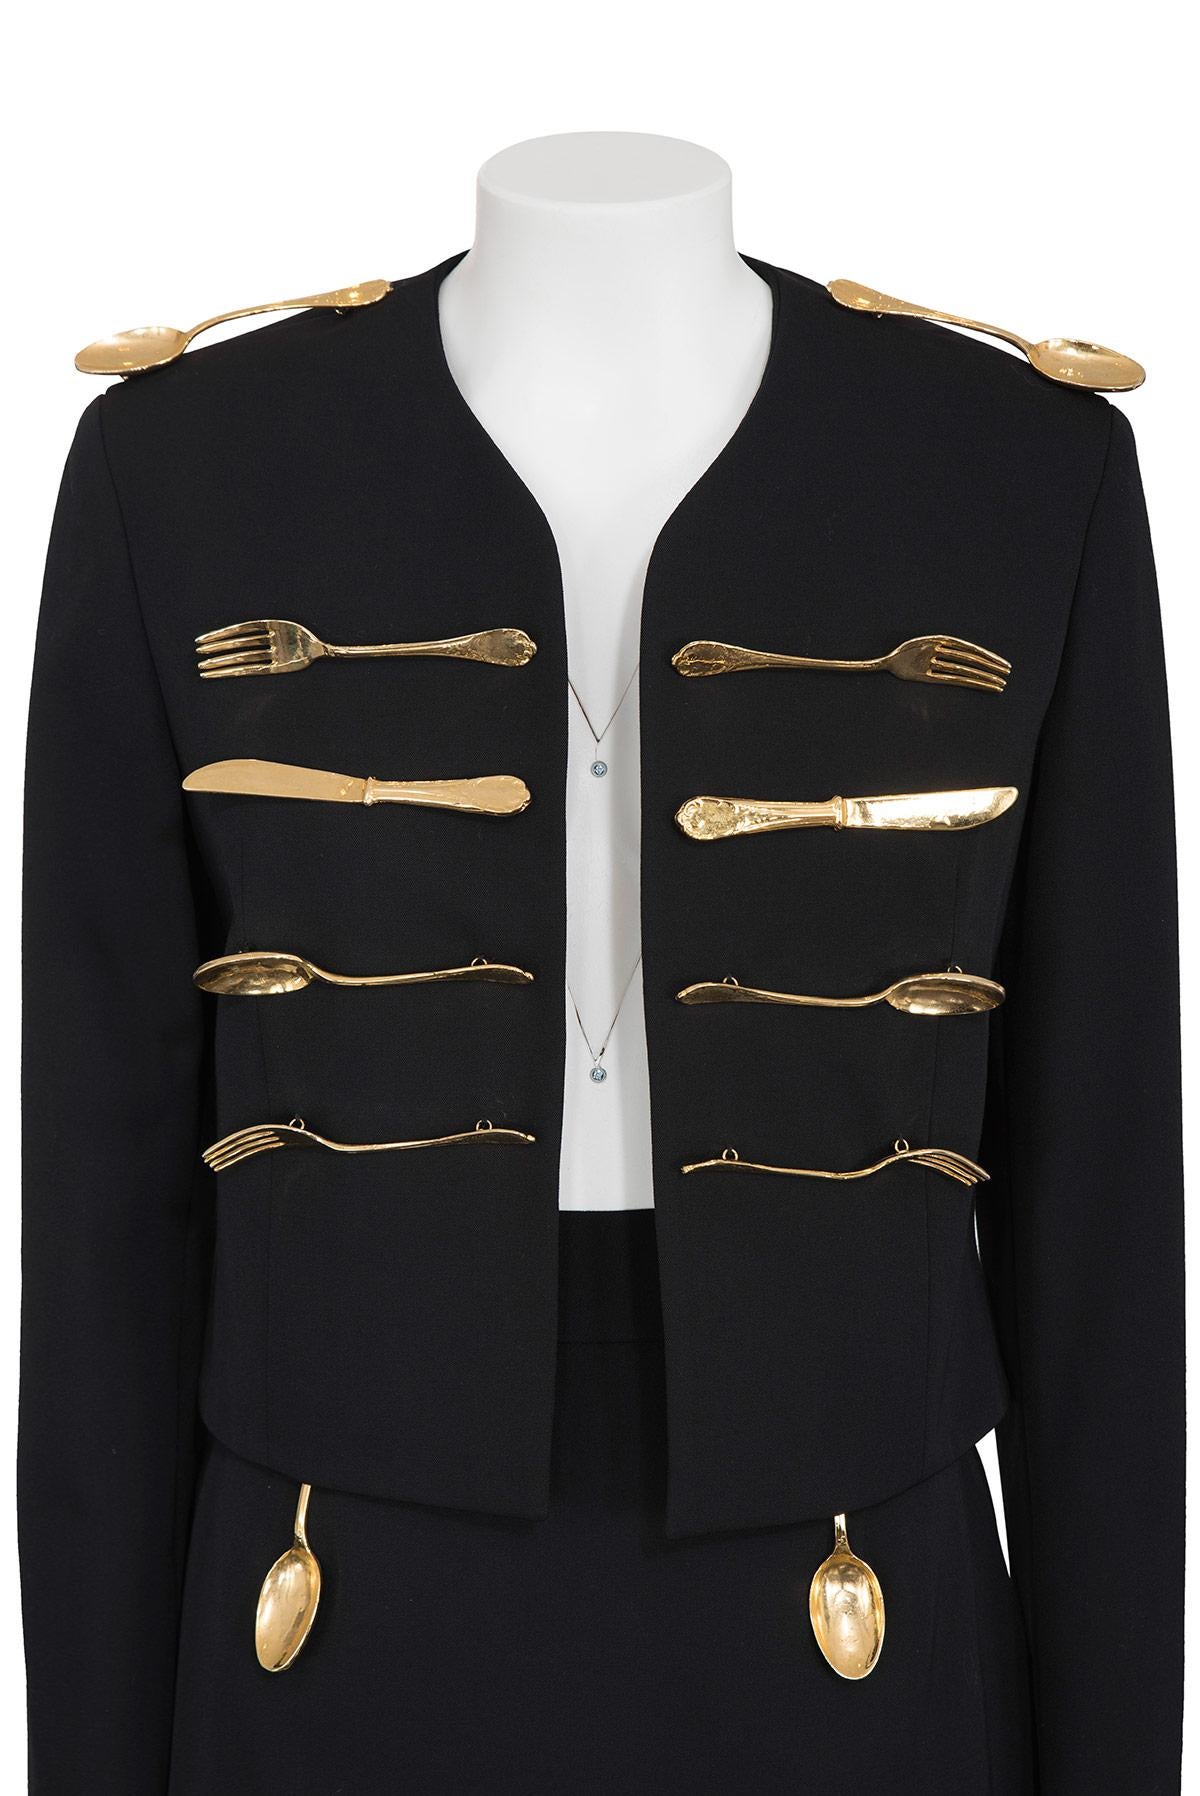 MOSCHINO SS 94 Iconic and Rare Cutlery Dinner Suit For Sale 2